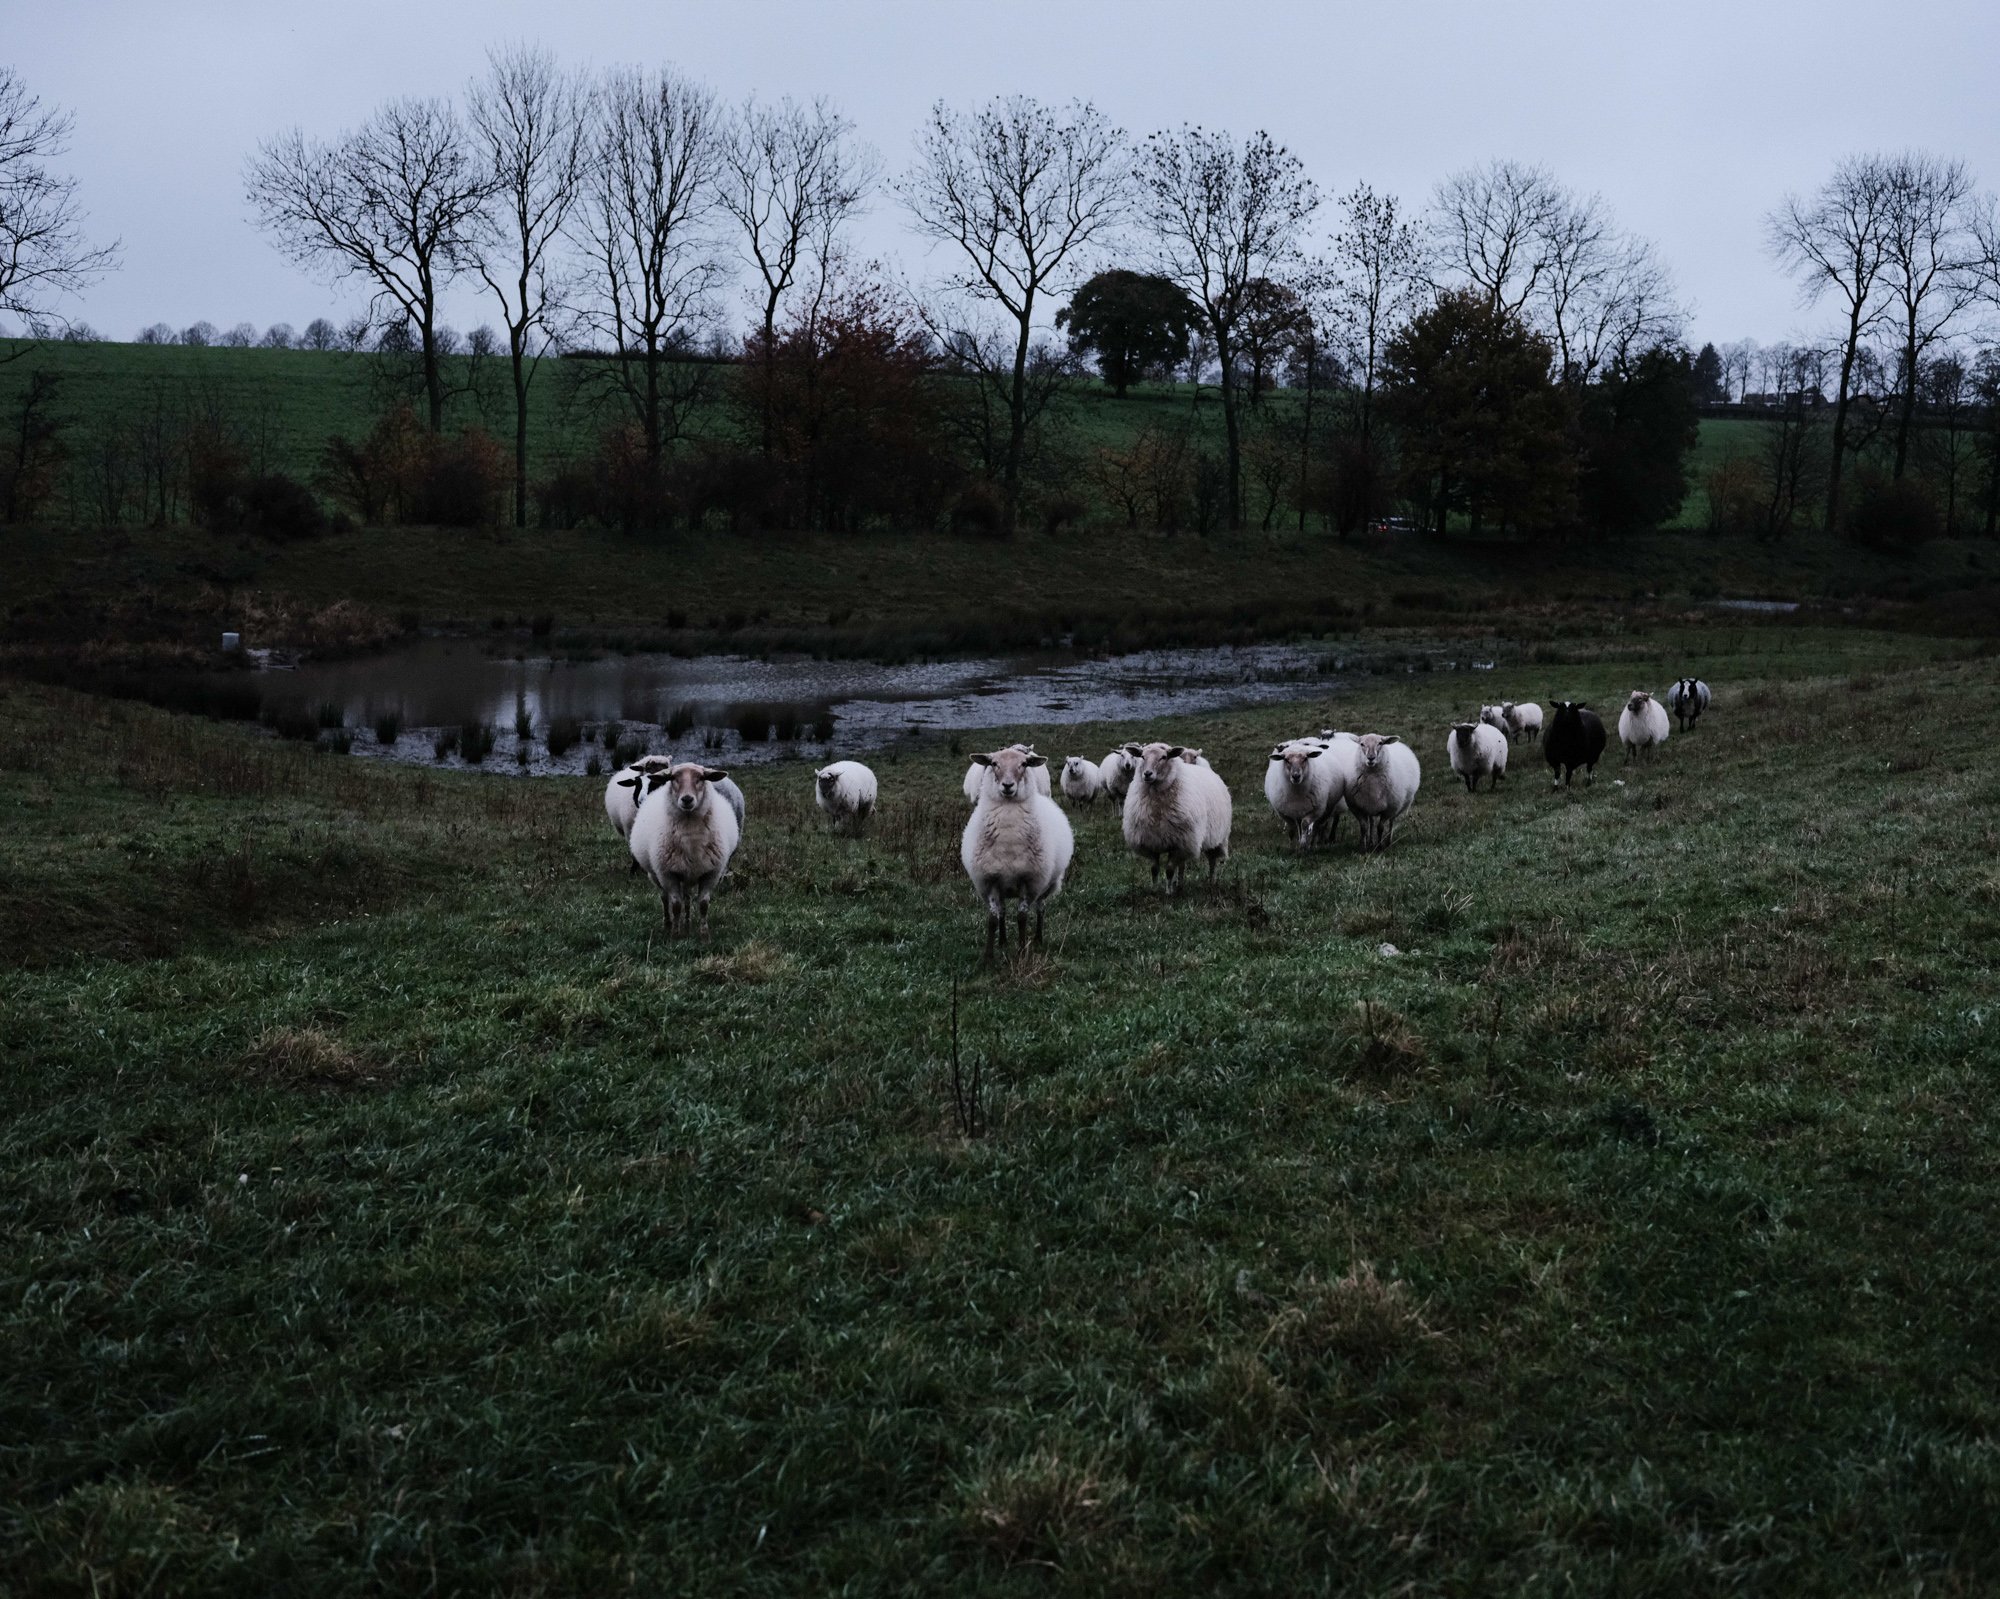  Sheep can strengthen biodiversity by eating specific plants, allowing room for different species. The herd itself also forms an ecological connection because small bugs, spores and seeds are transported through the fur. Epe, Netherlands. 